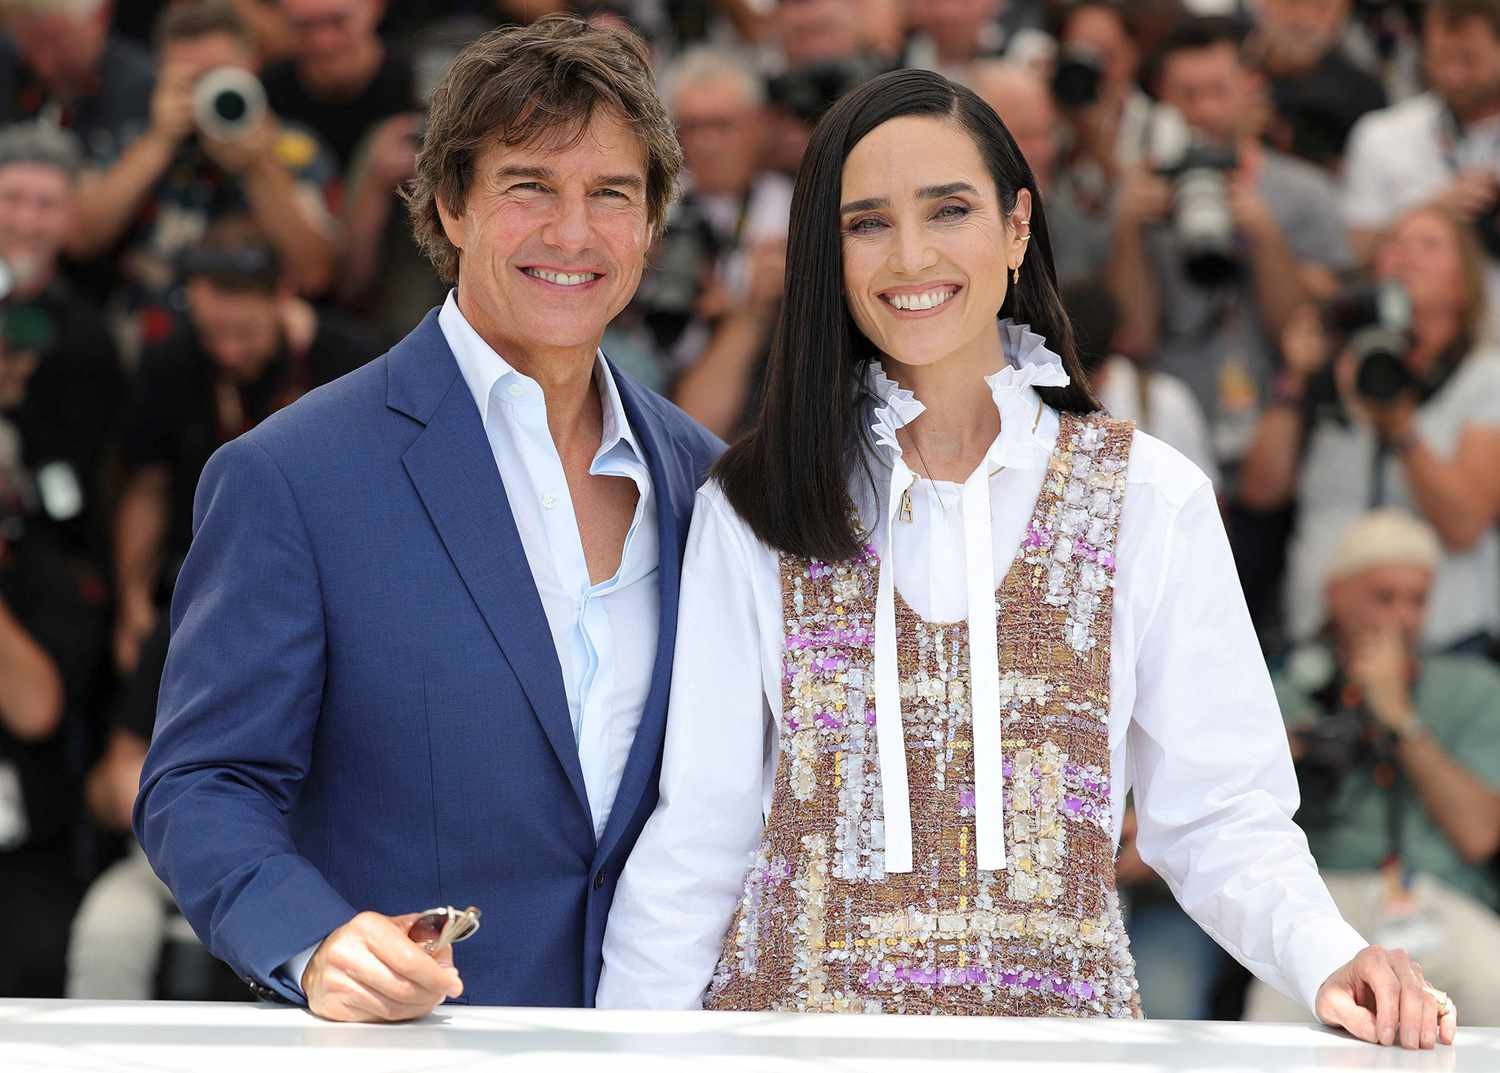 Tom Cruise and Jennifer Connelly.